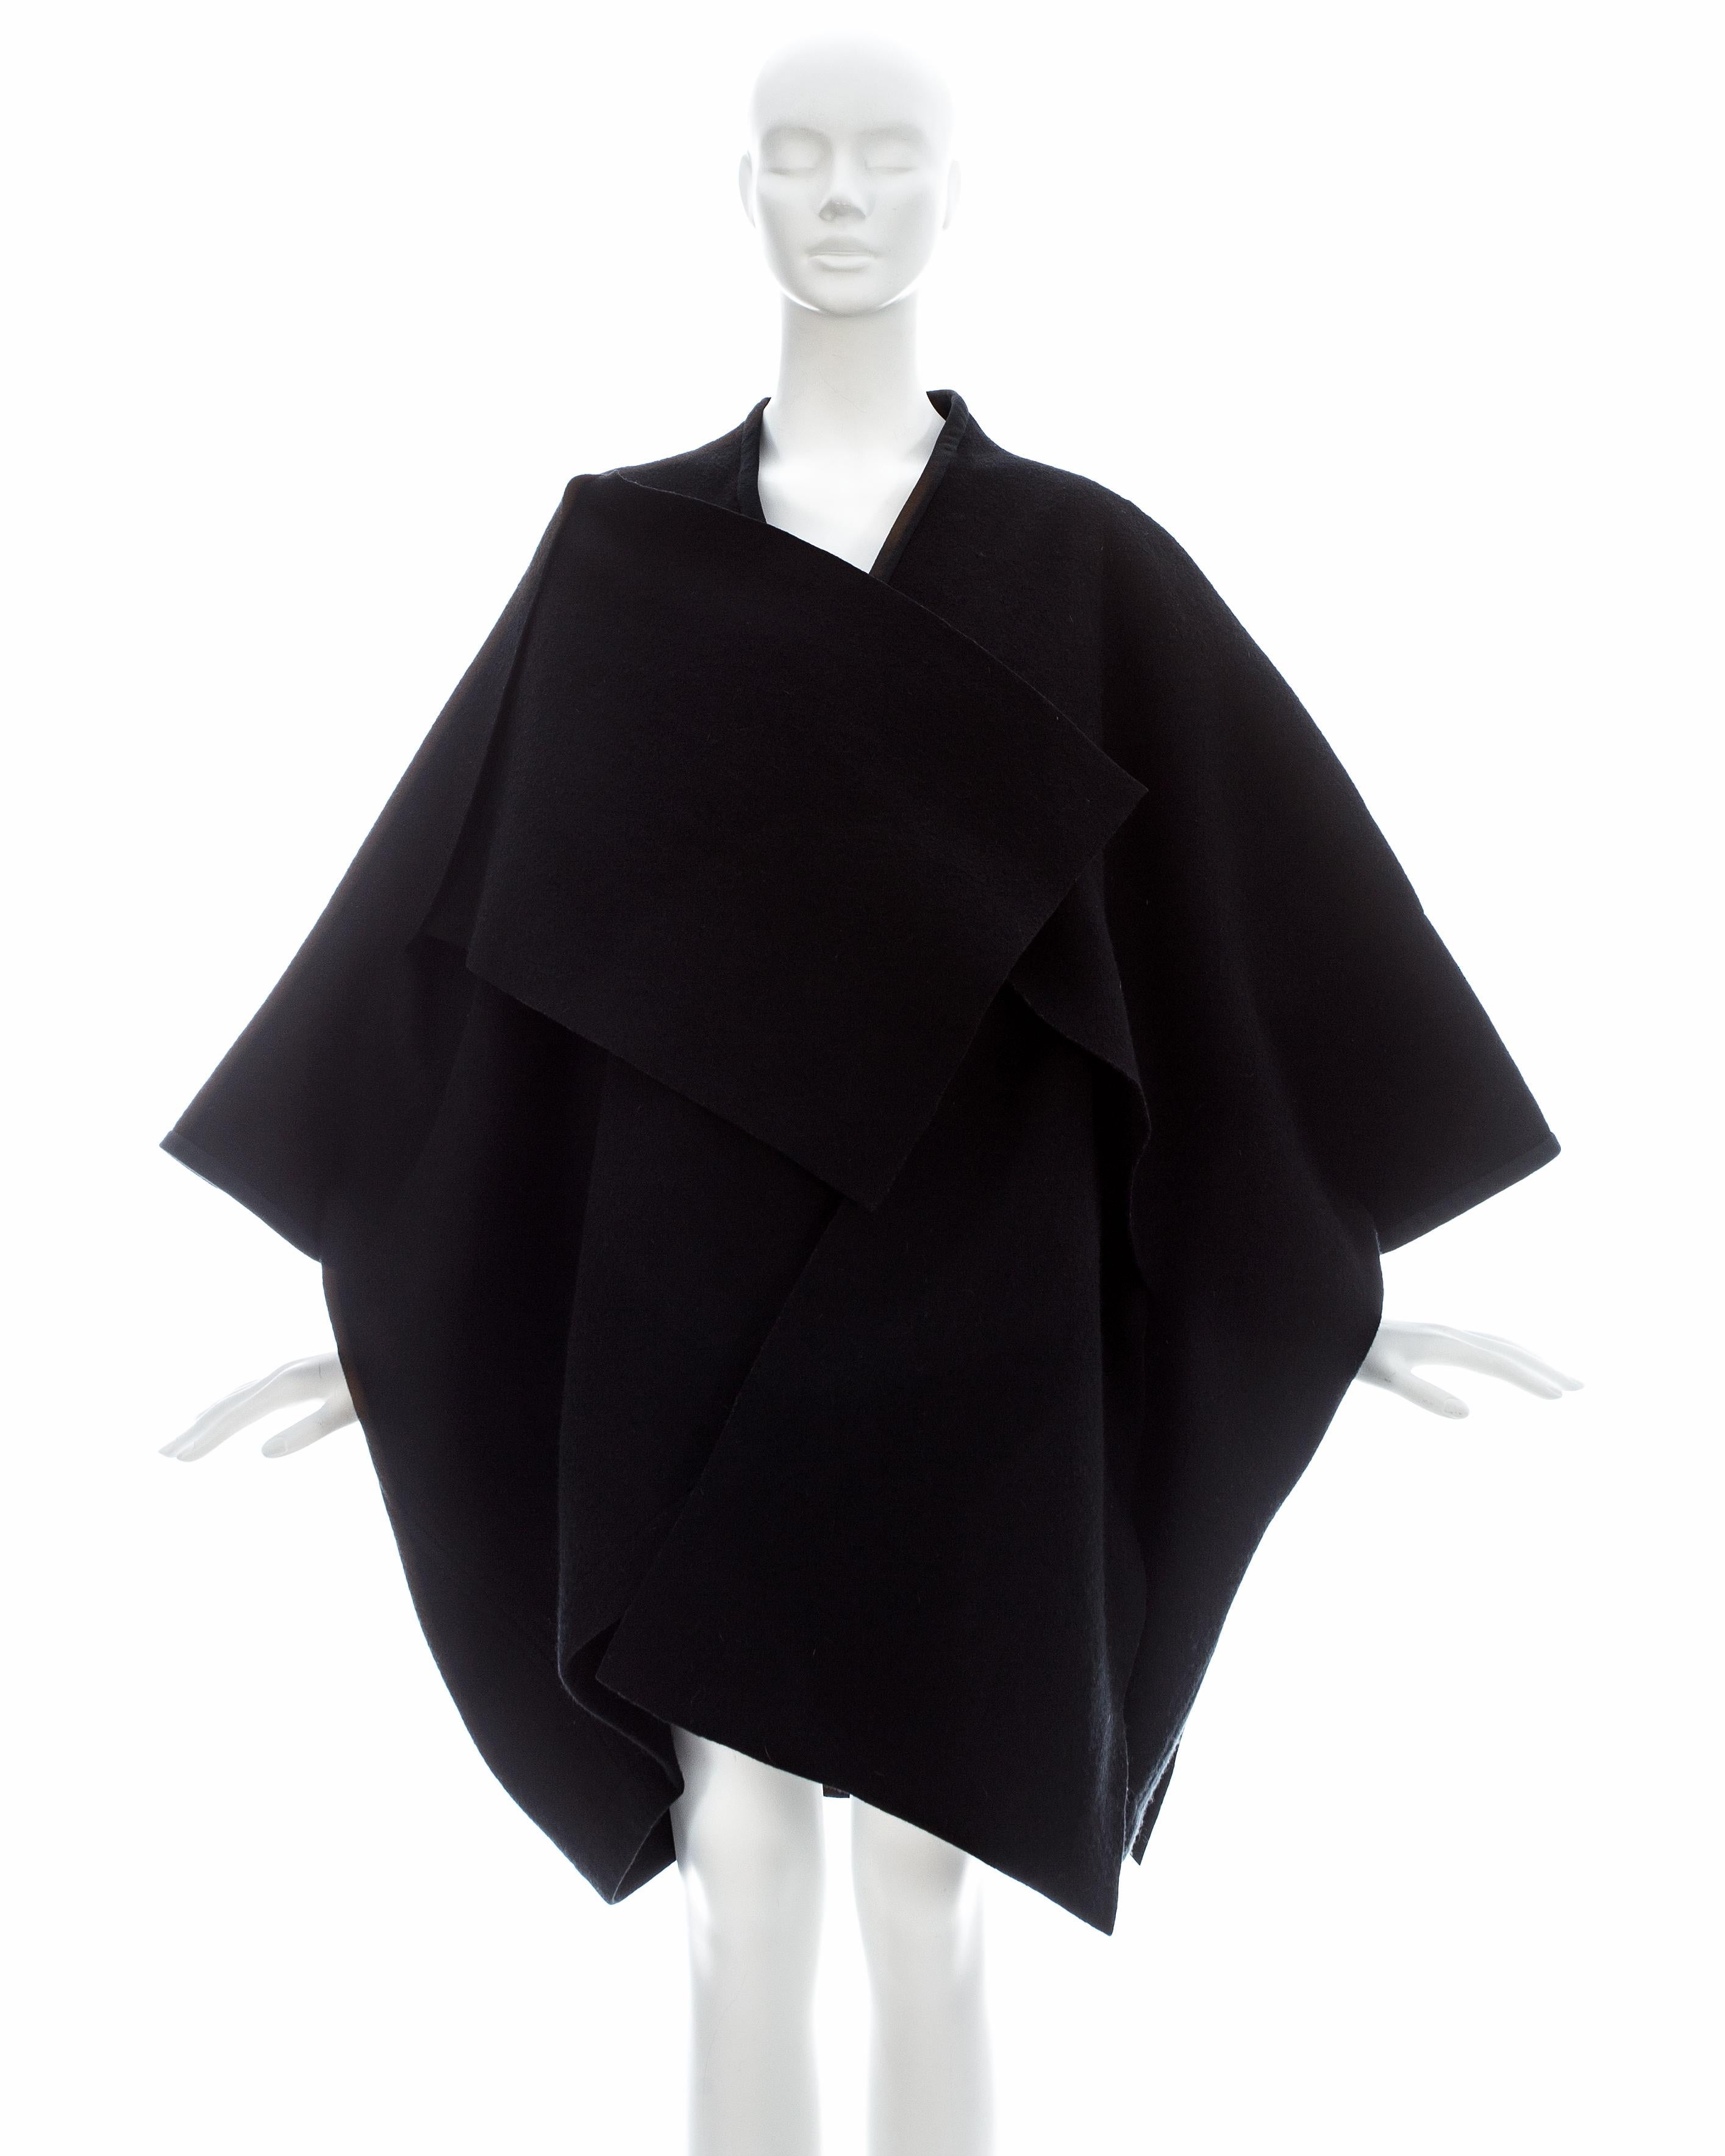 Comme des Garcons; Black wool felt coat made from two rectangular panels woven together through large slits cut into the fabric. There are no buttons or fasteners.  

Fall-Winter 1983